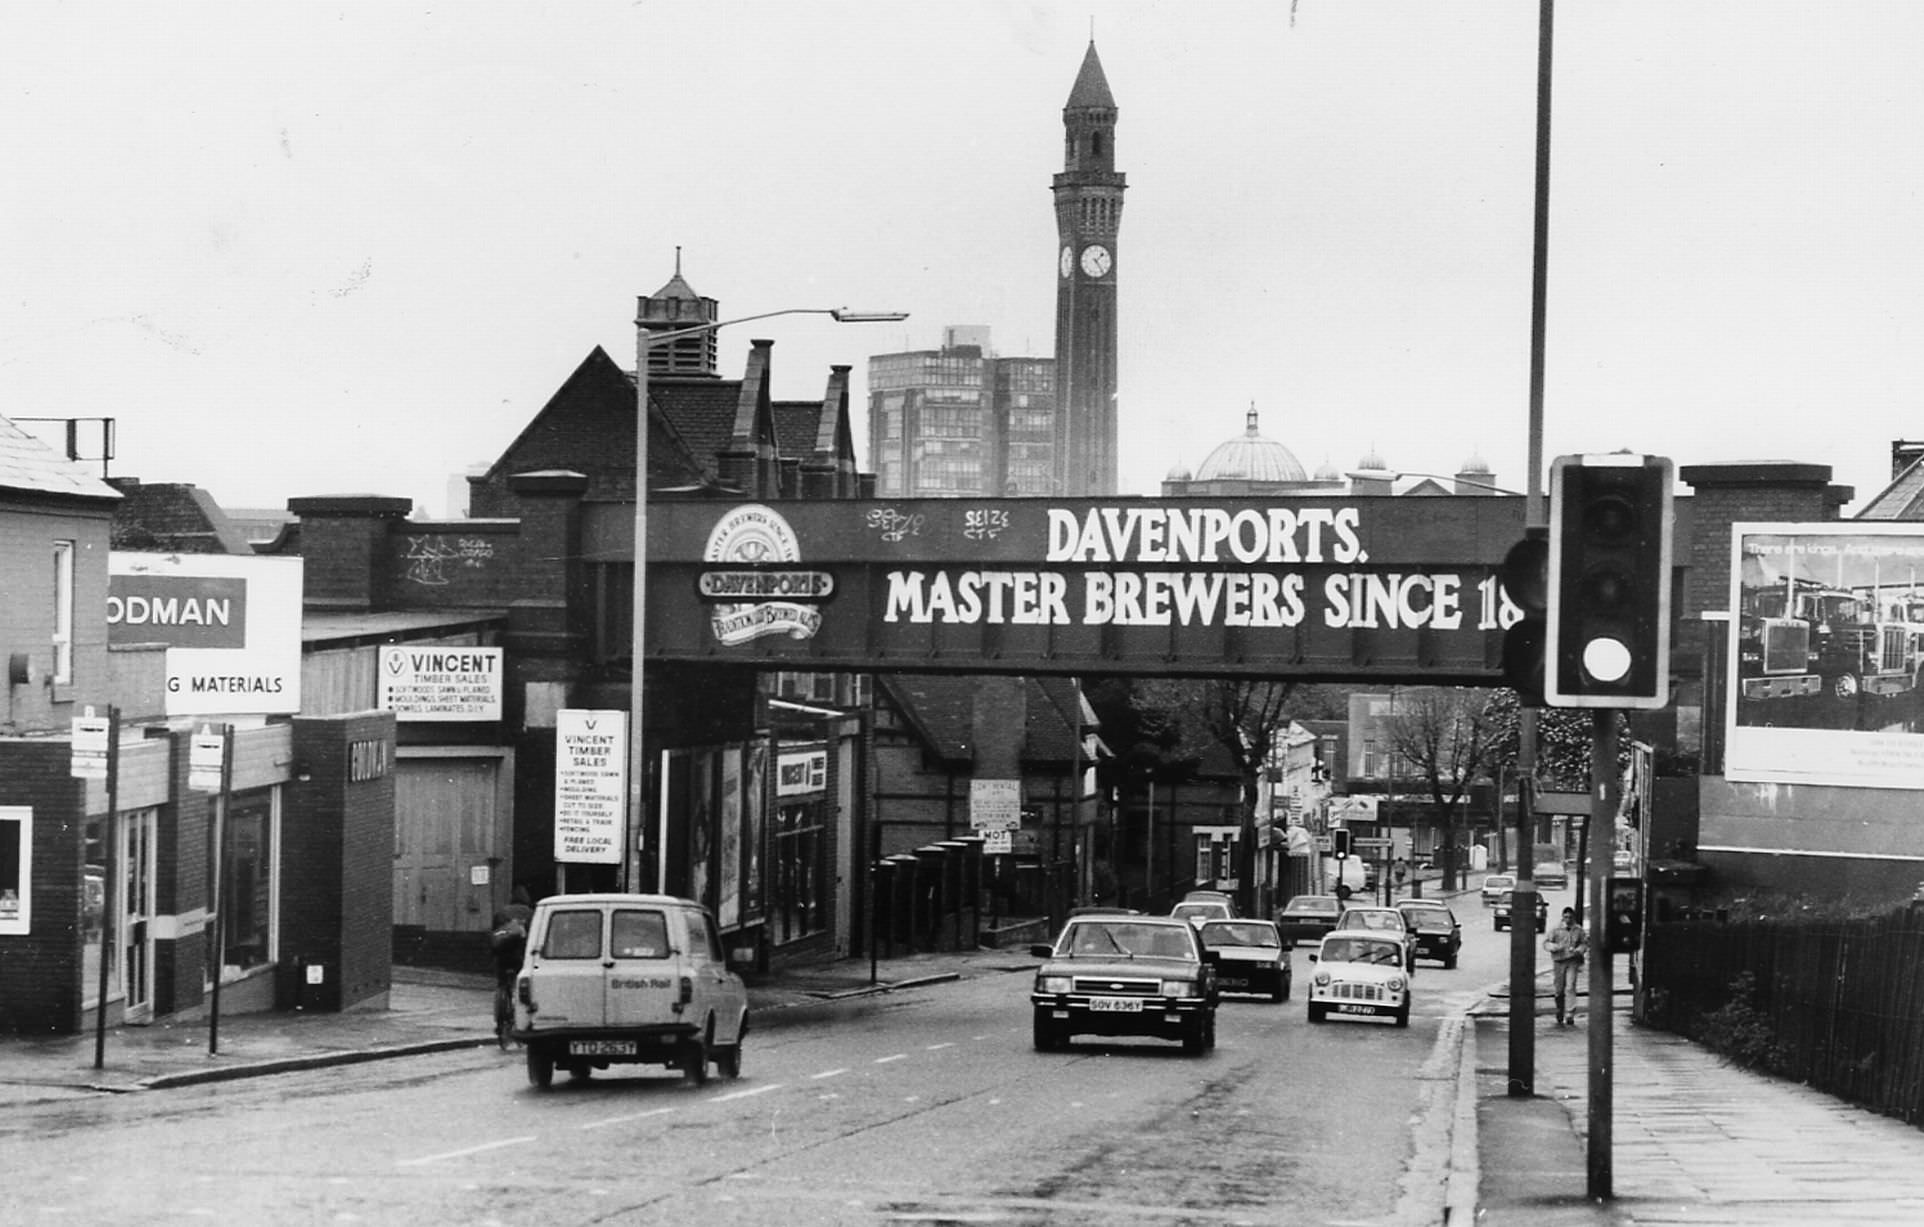 Bristol Road Selly Oak looking towards the railway bridge with the Birmingham University clock tower in the background.17th May 1987.